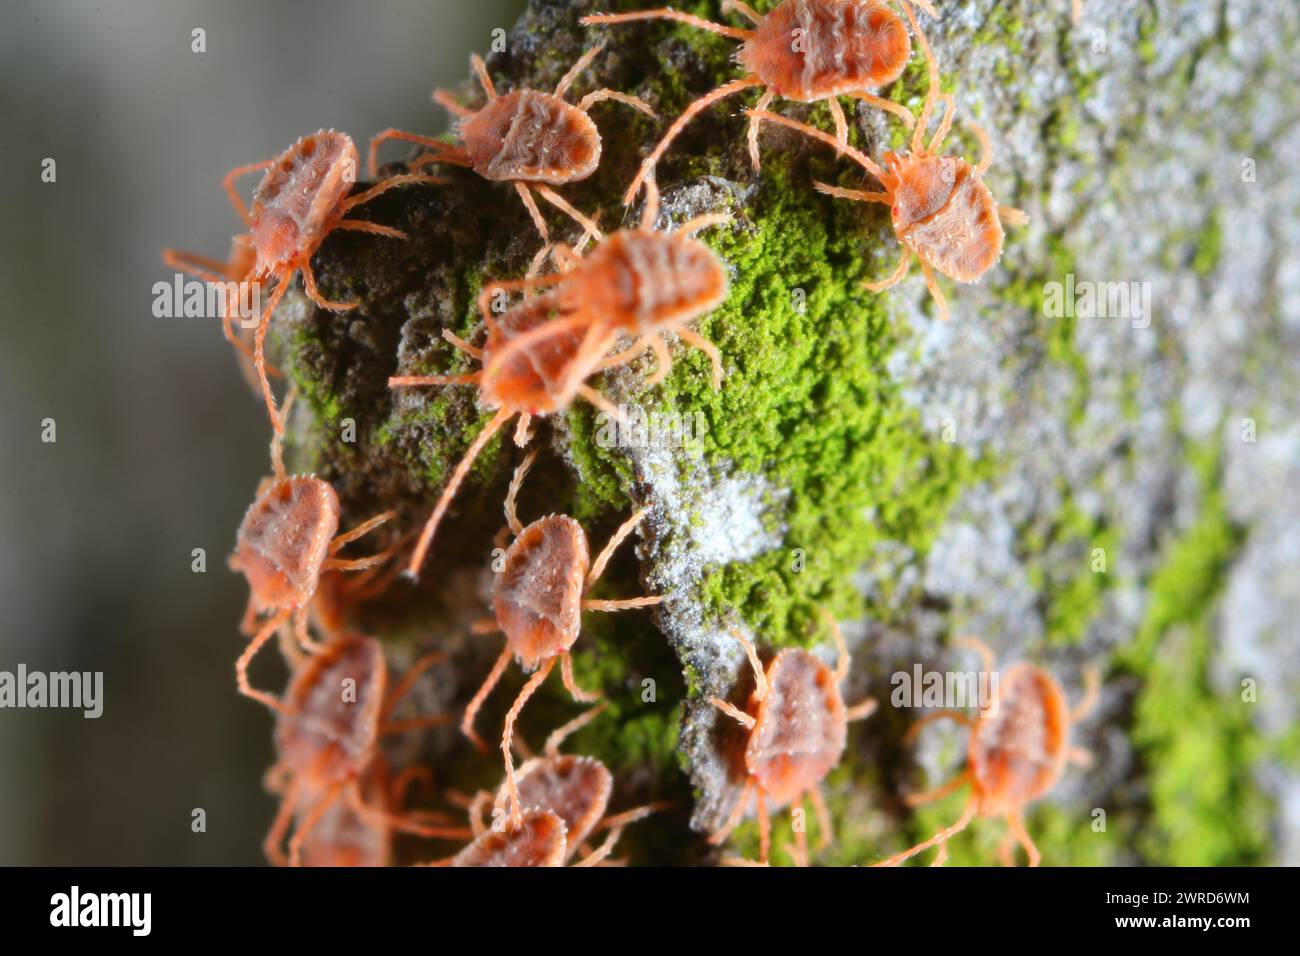 Mass group Mites of genus Bryobia in the spider mite family, Tetranychidae. These pests feed on plants. Stock Photo